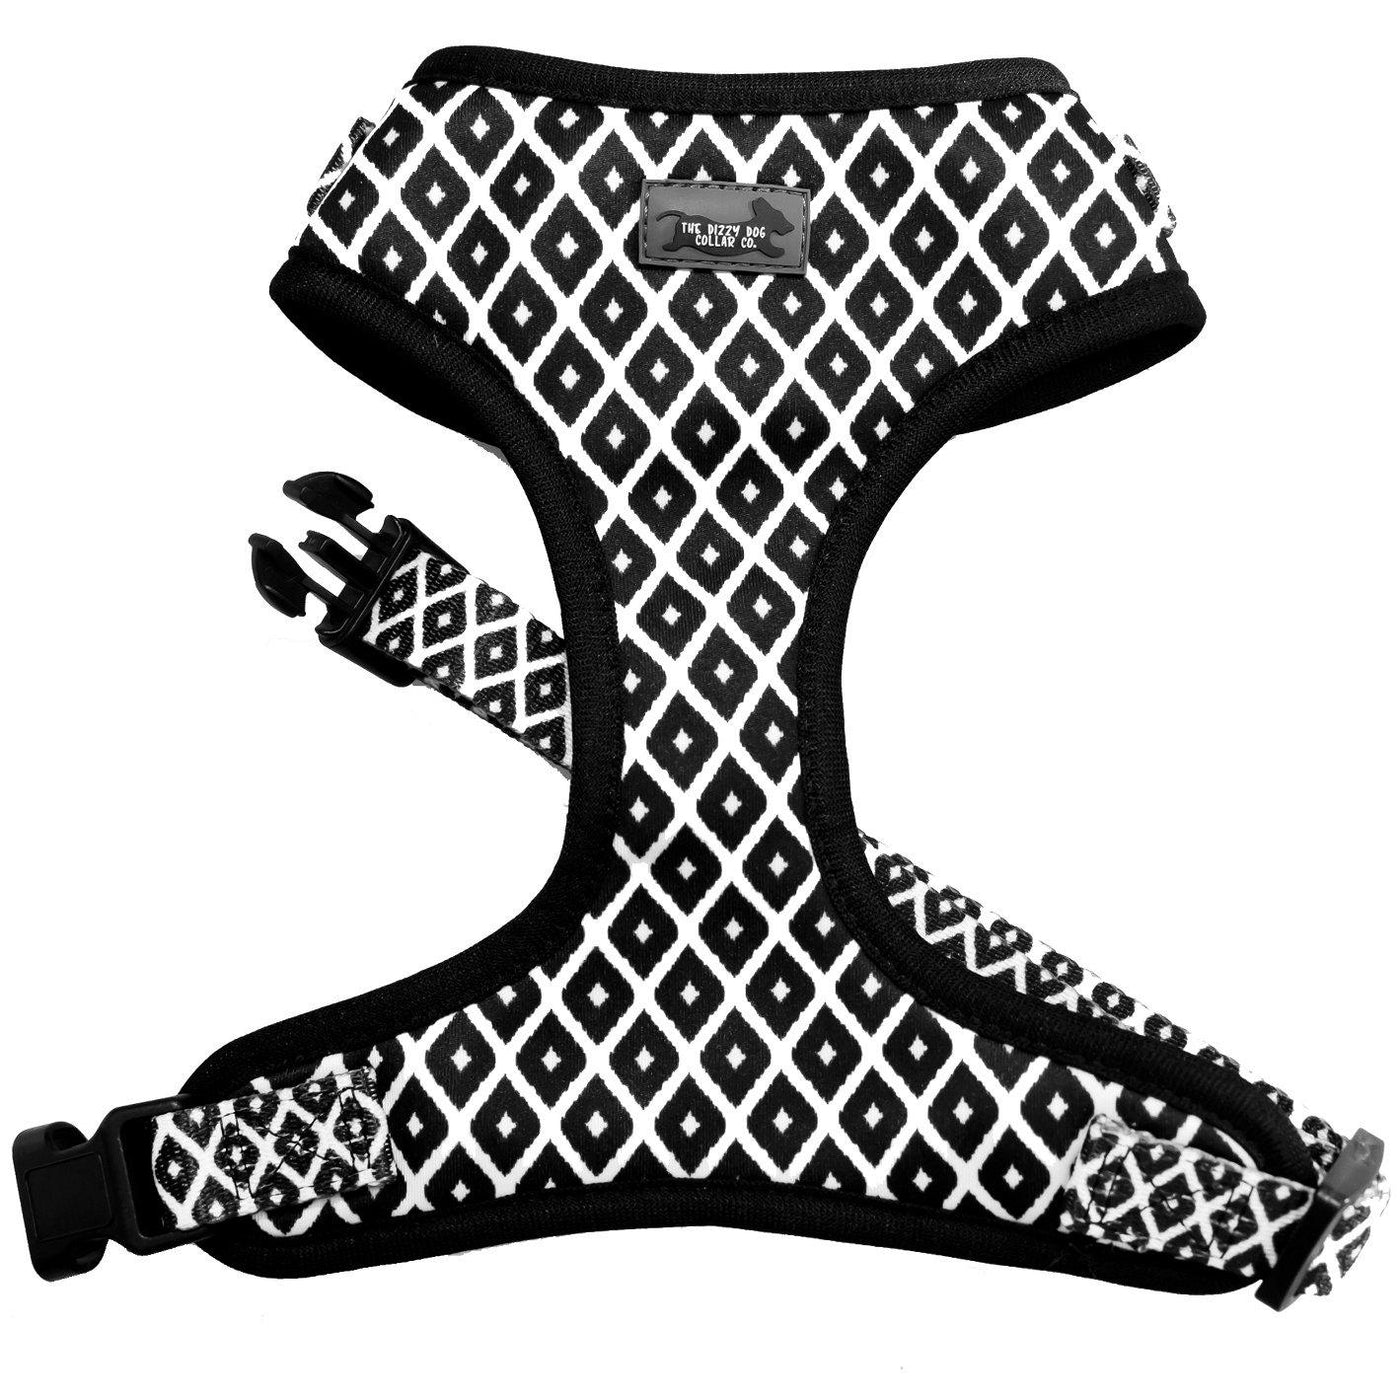 black and white dog harness, dog harnesses, classic dog harness with adjustable neck